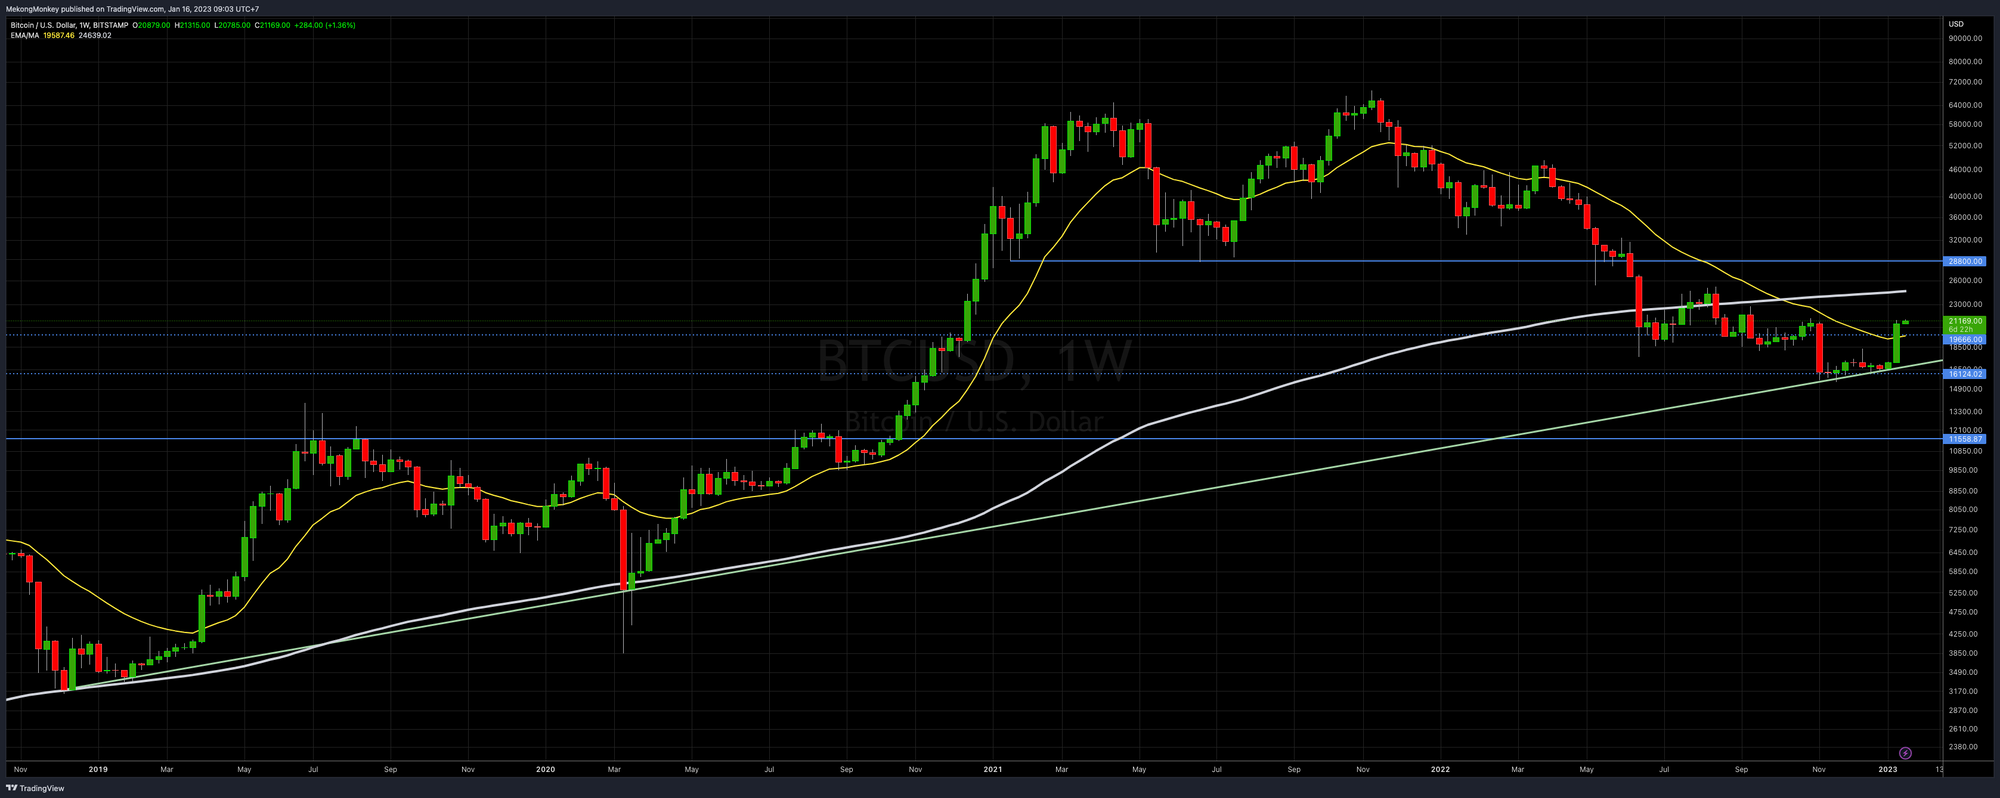 BTCUSD, the weekly chart with the 21 EMA (yellow) and the 200 SMA (white)